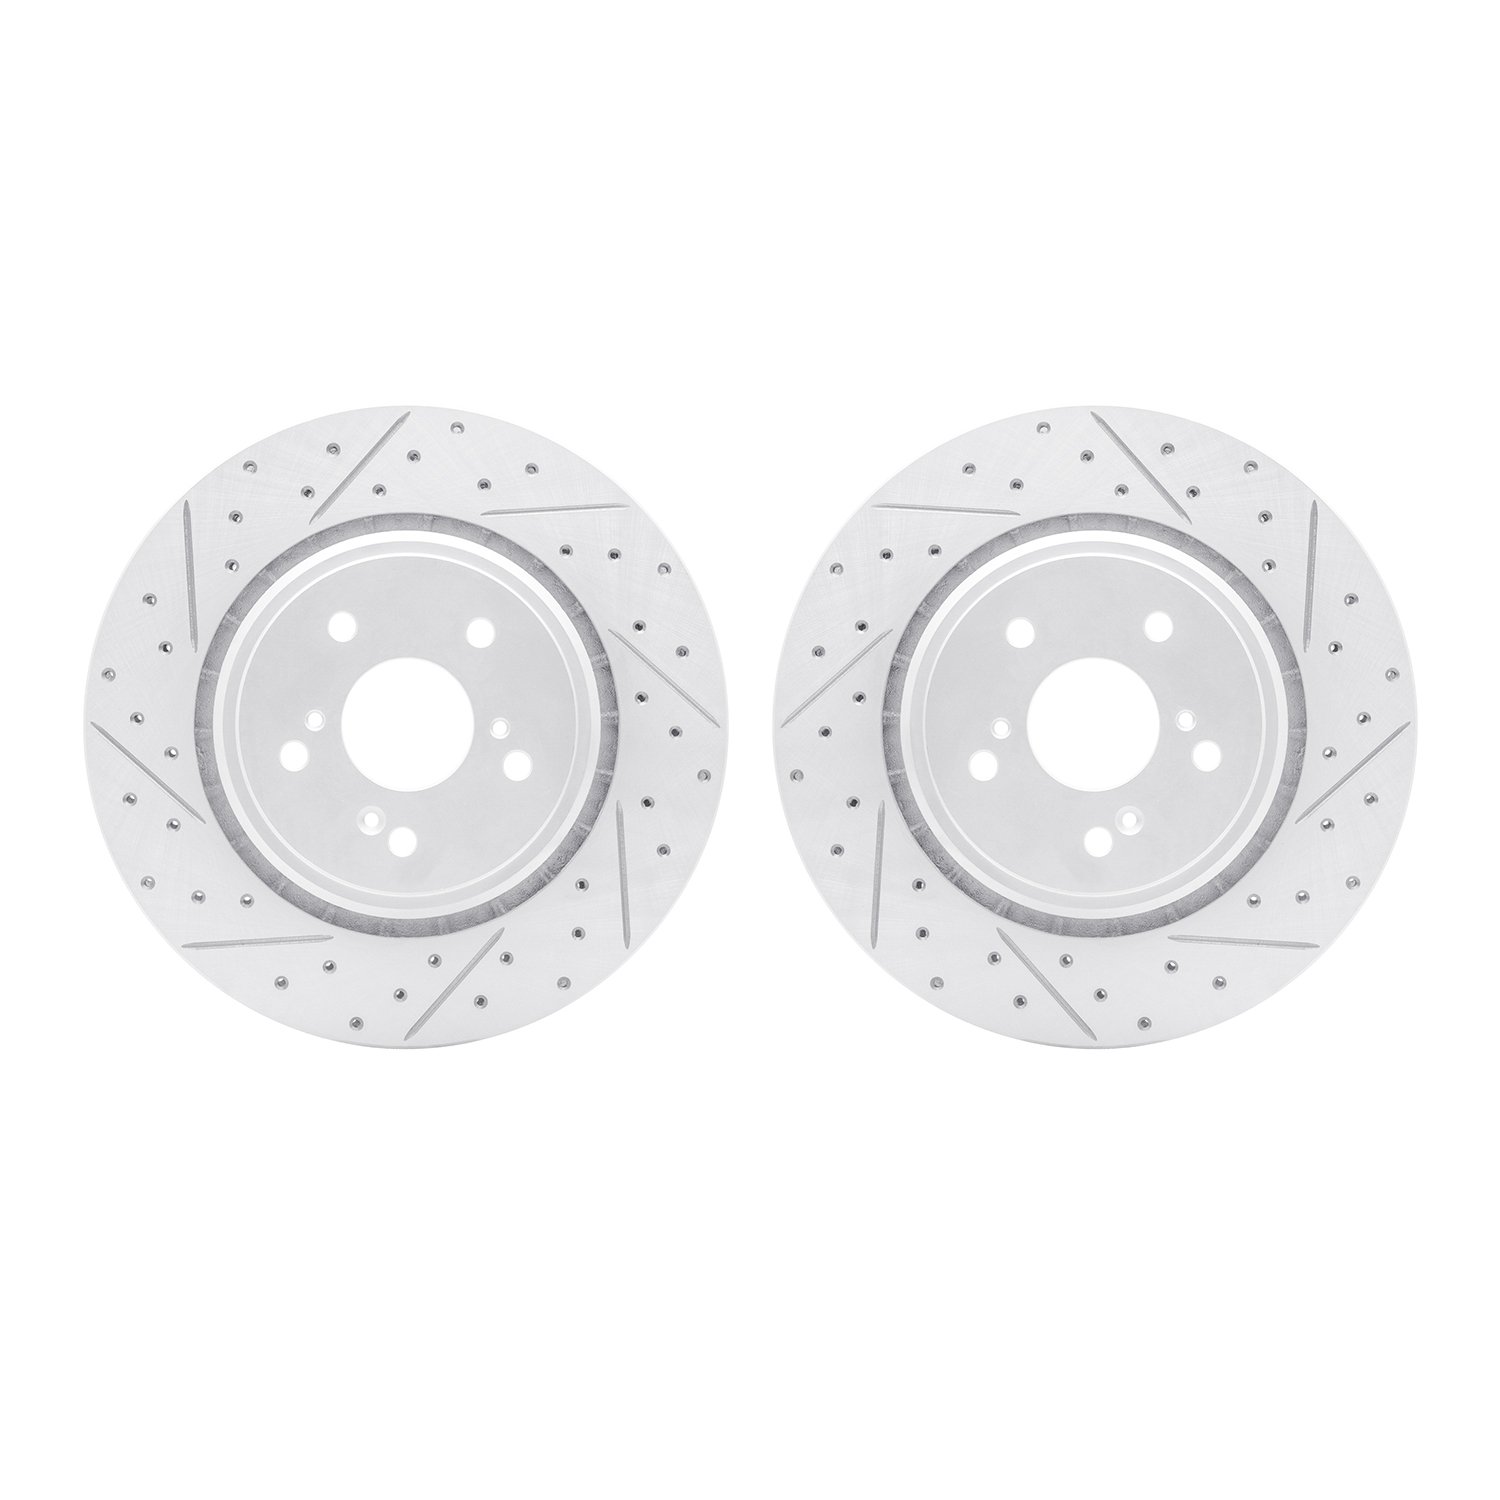 2002-58001 Geoperformance Drilled/Slotted Brake Rotors, 2014-2020 Acura/Honda, Position: Front